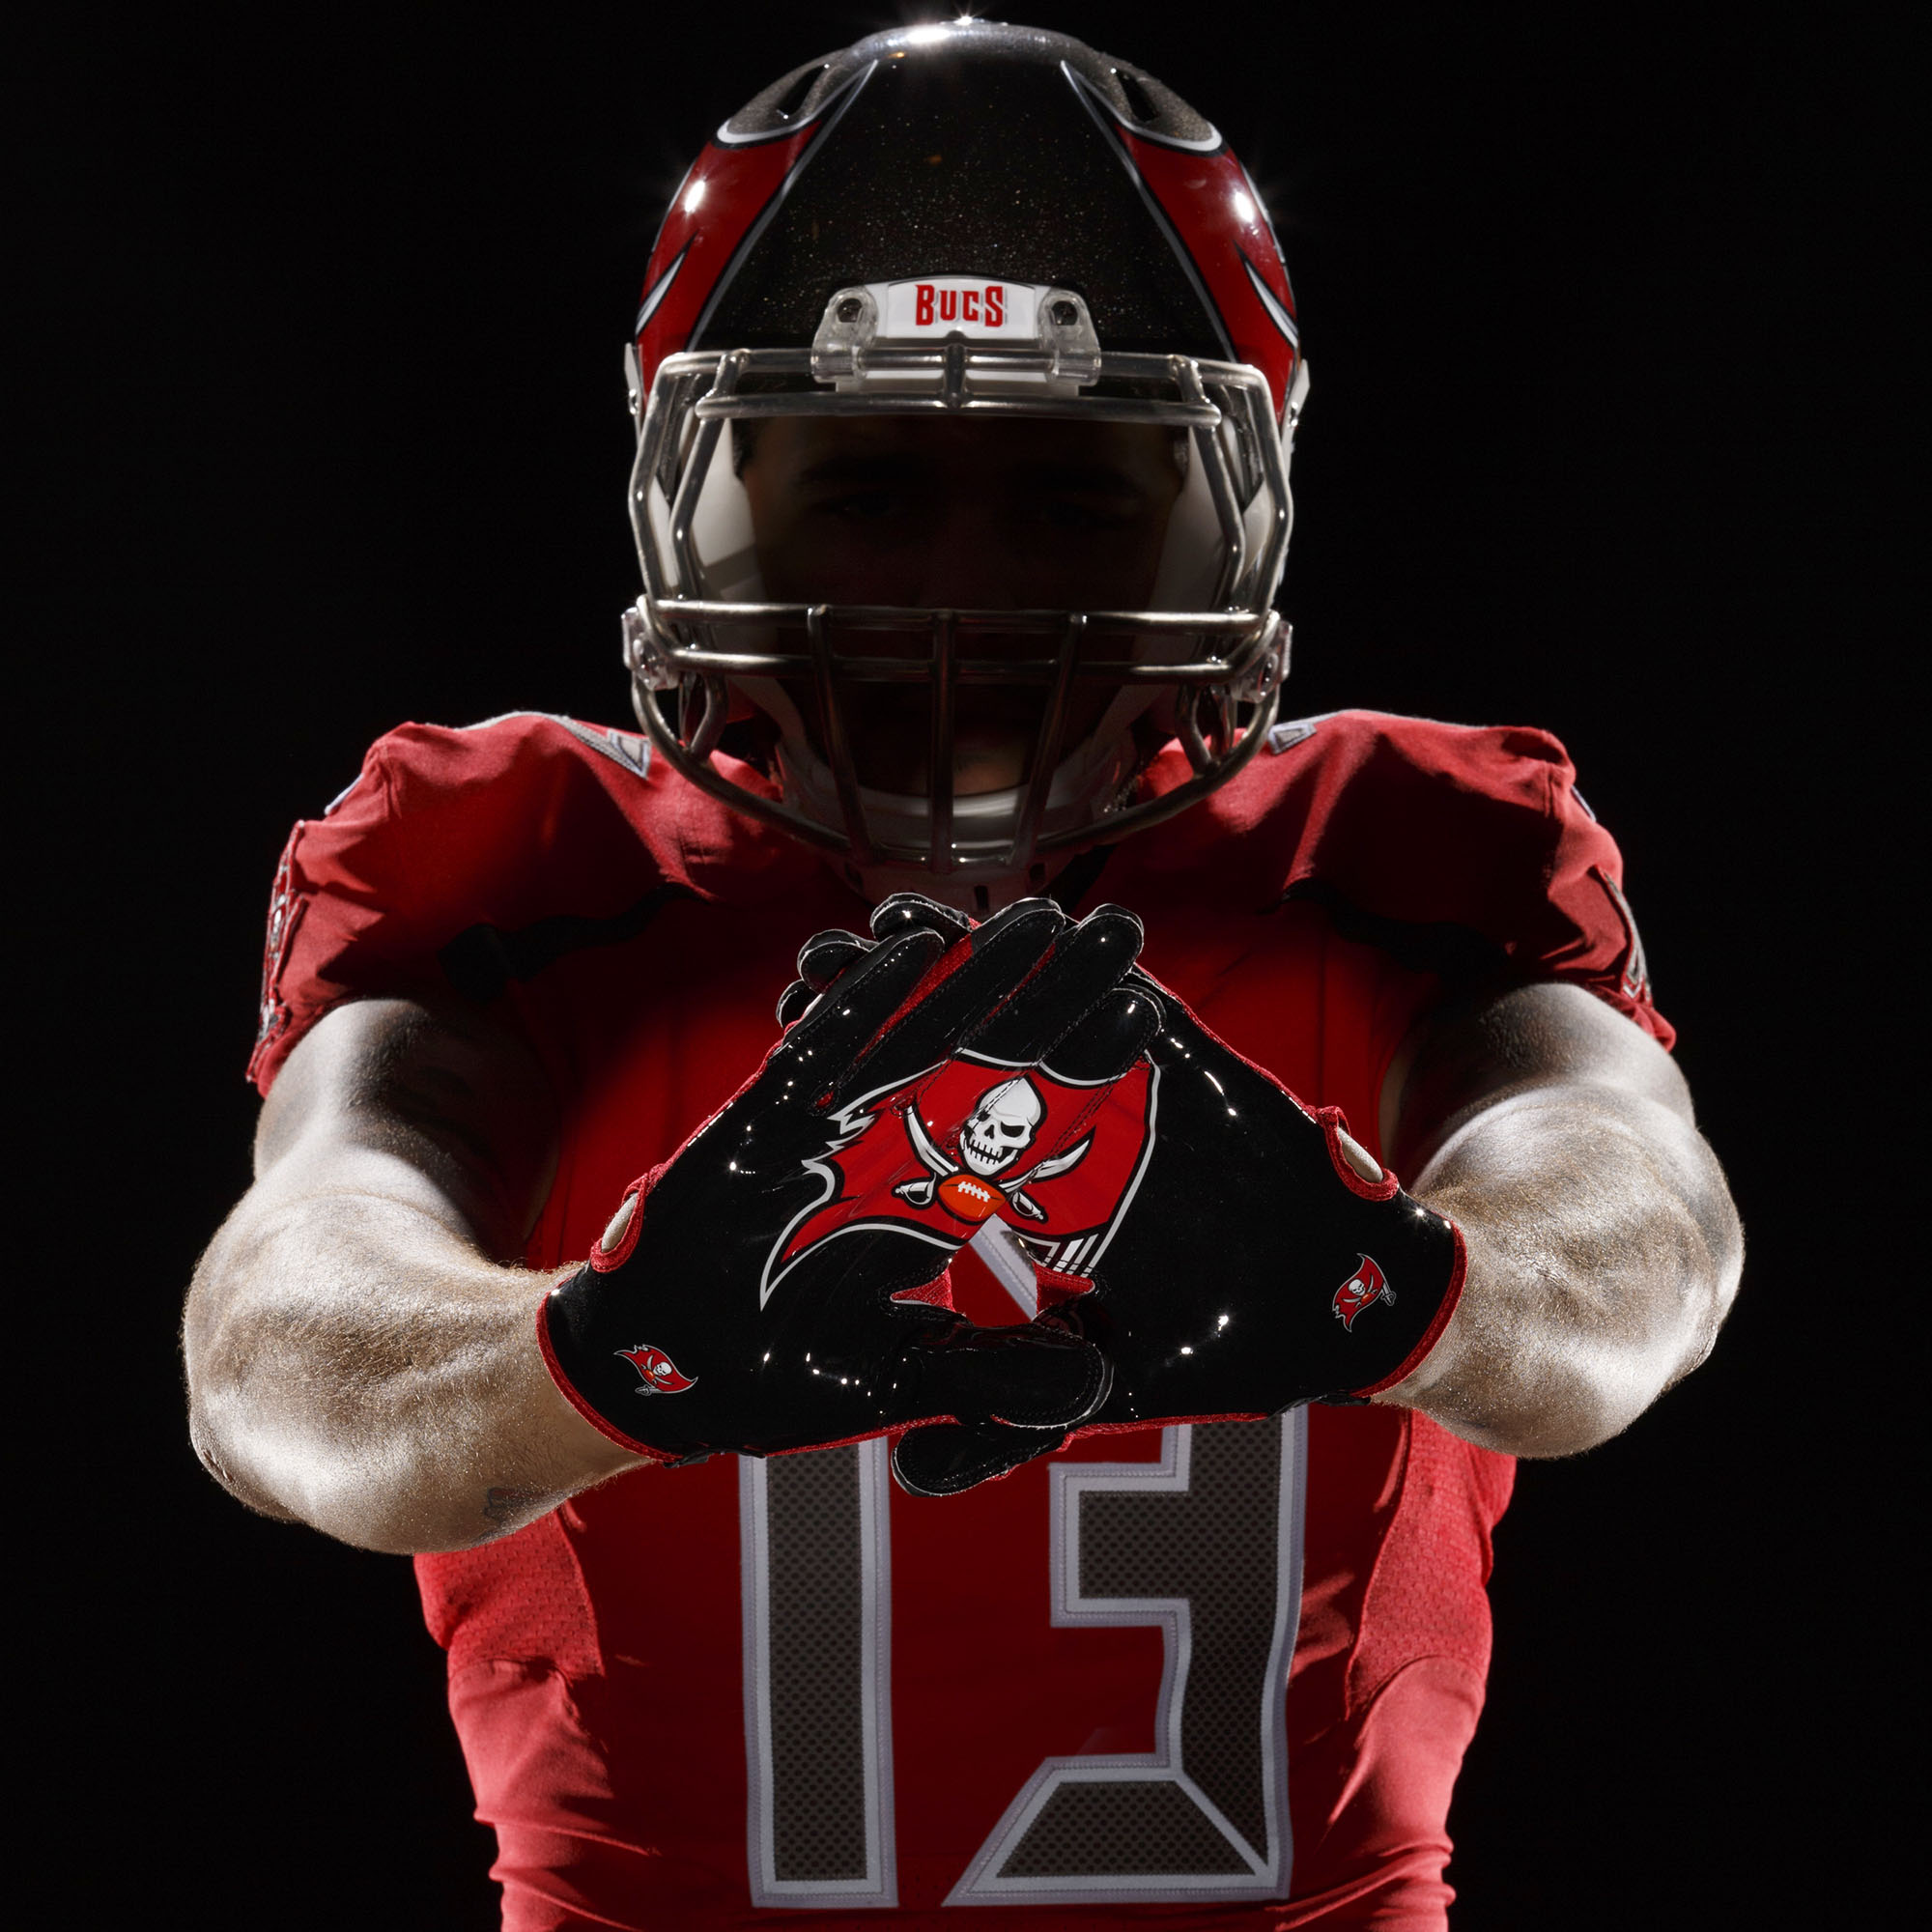 Buccaneers Nike Color Rush Uniform Photo Shoot - Advertising & Commercial Photographer, Tampa